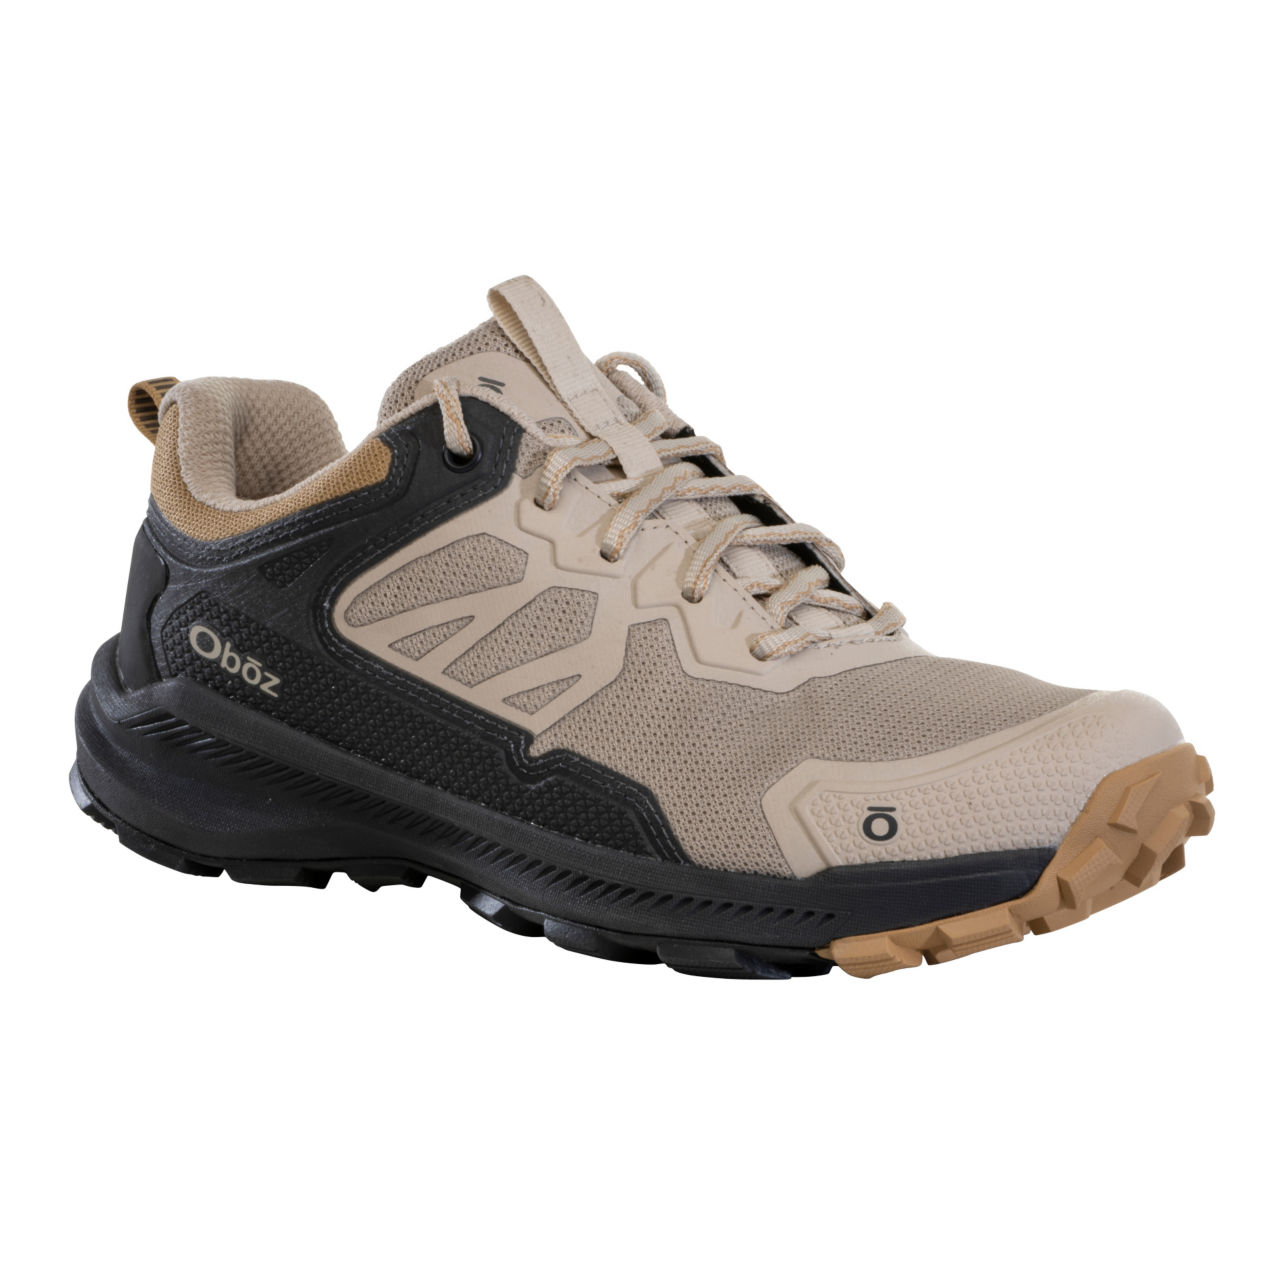 Oboz® Katabatic Low Trail Runners - SNOW LEOPARD image number 0